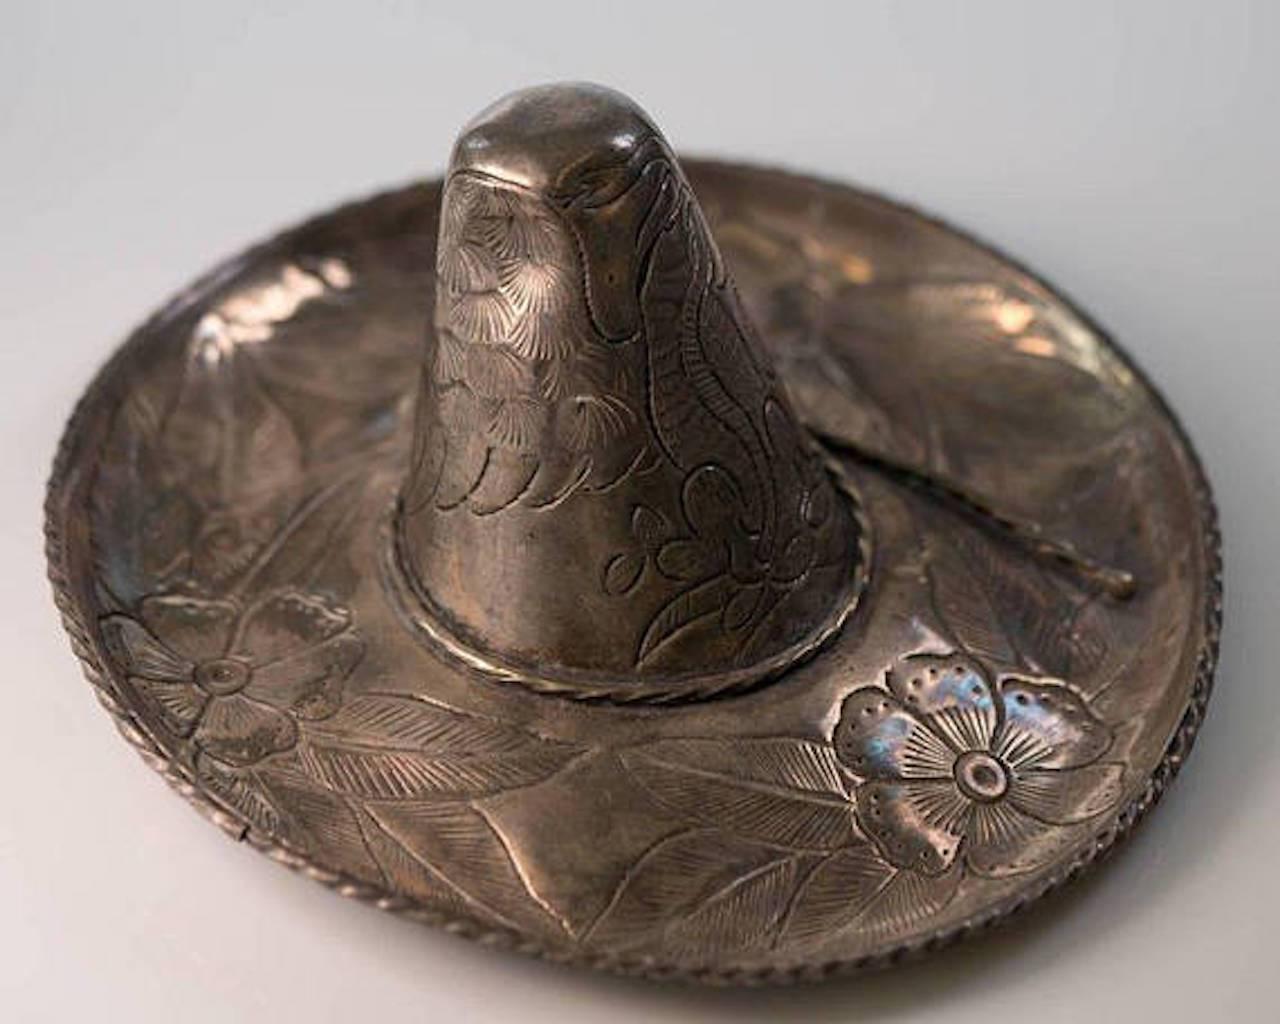 This 1950s Retro Hand Engraved Sterling Silver Sombrero Sculpture makes a Great Conversation piece! 

Mexican artist Maciel created this unique piece from .925 sterling silver. The upper and undersides of the sombrero are engraved with a floral